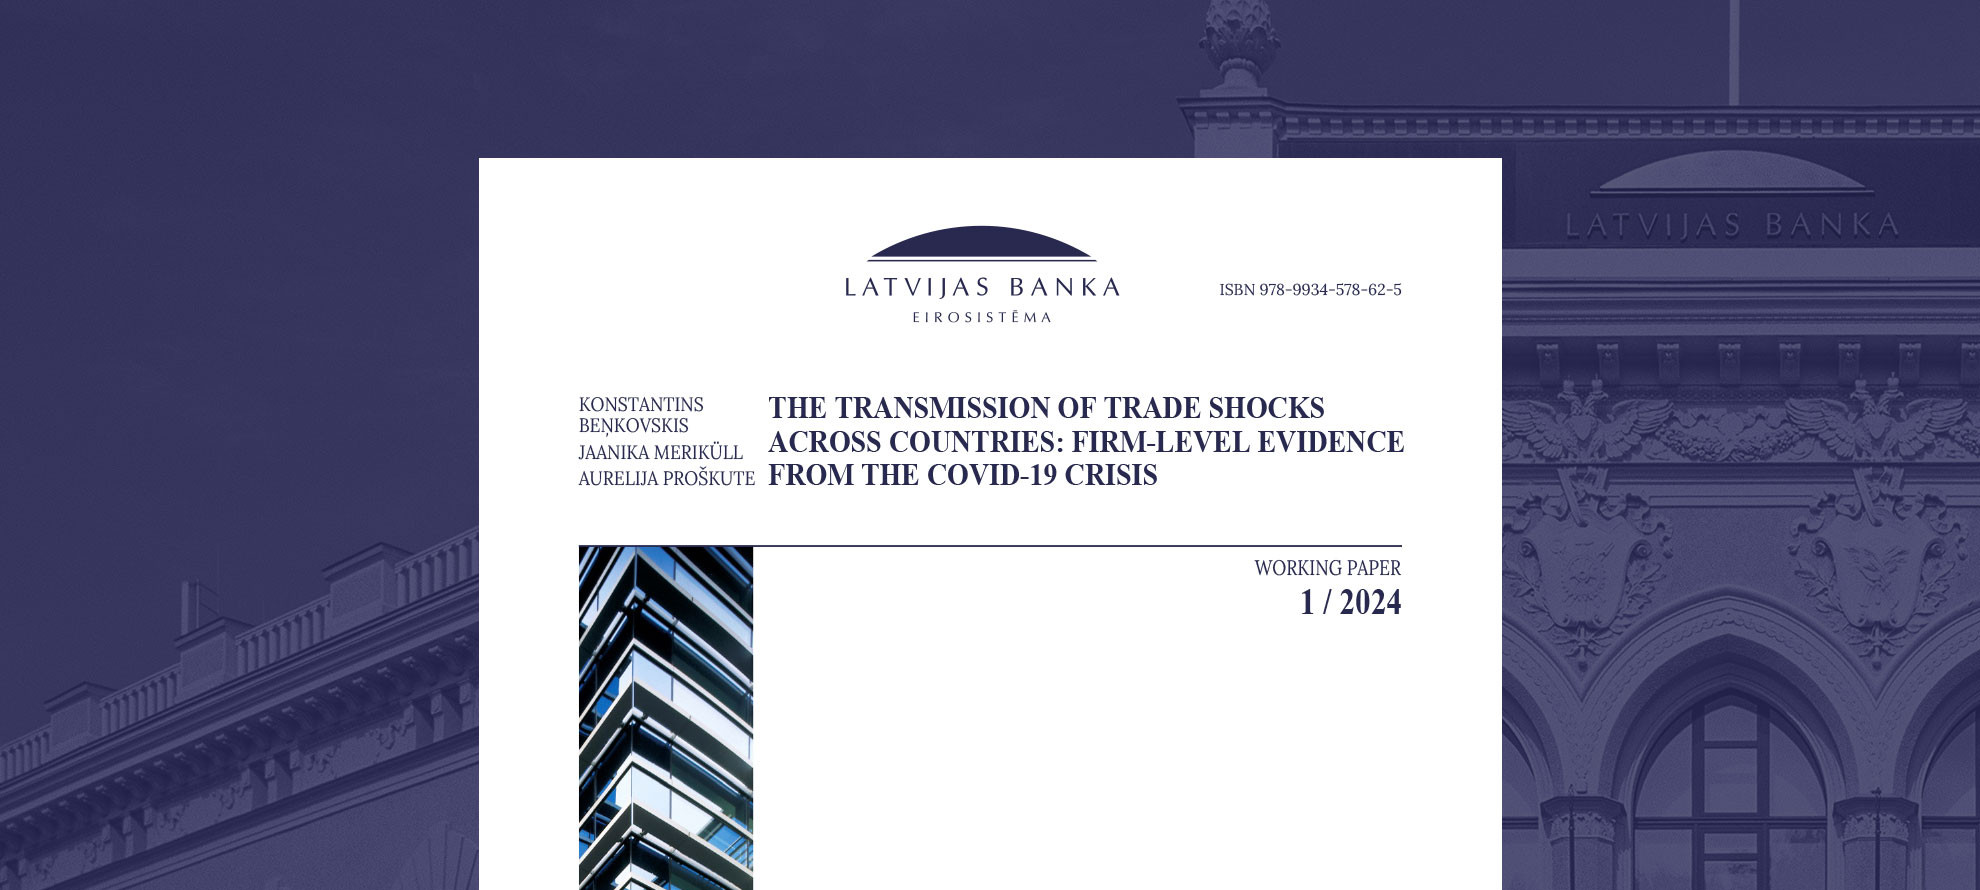 The transmission of trade shocks across countries: firm-level evidence from the Covid-19 crisis